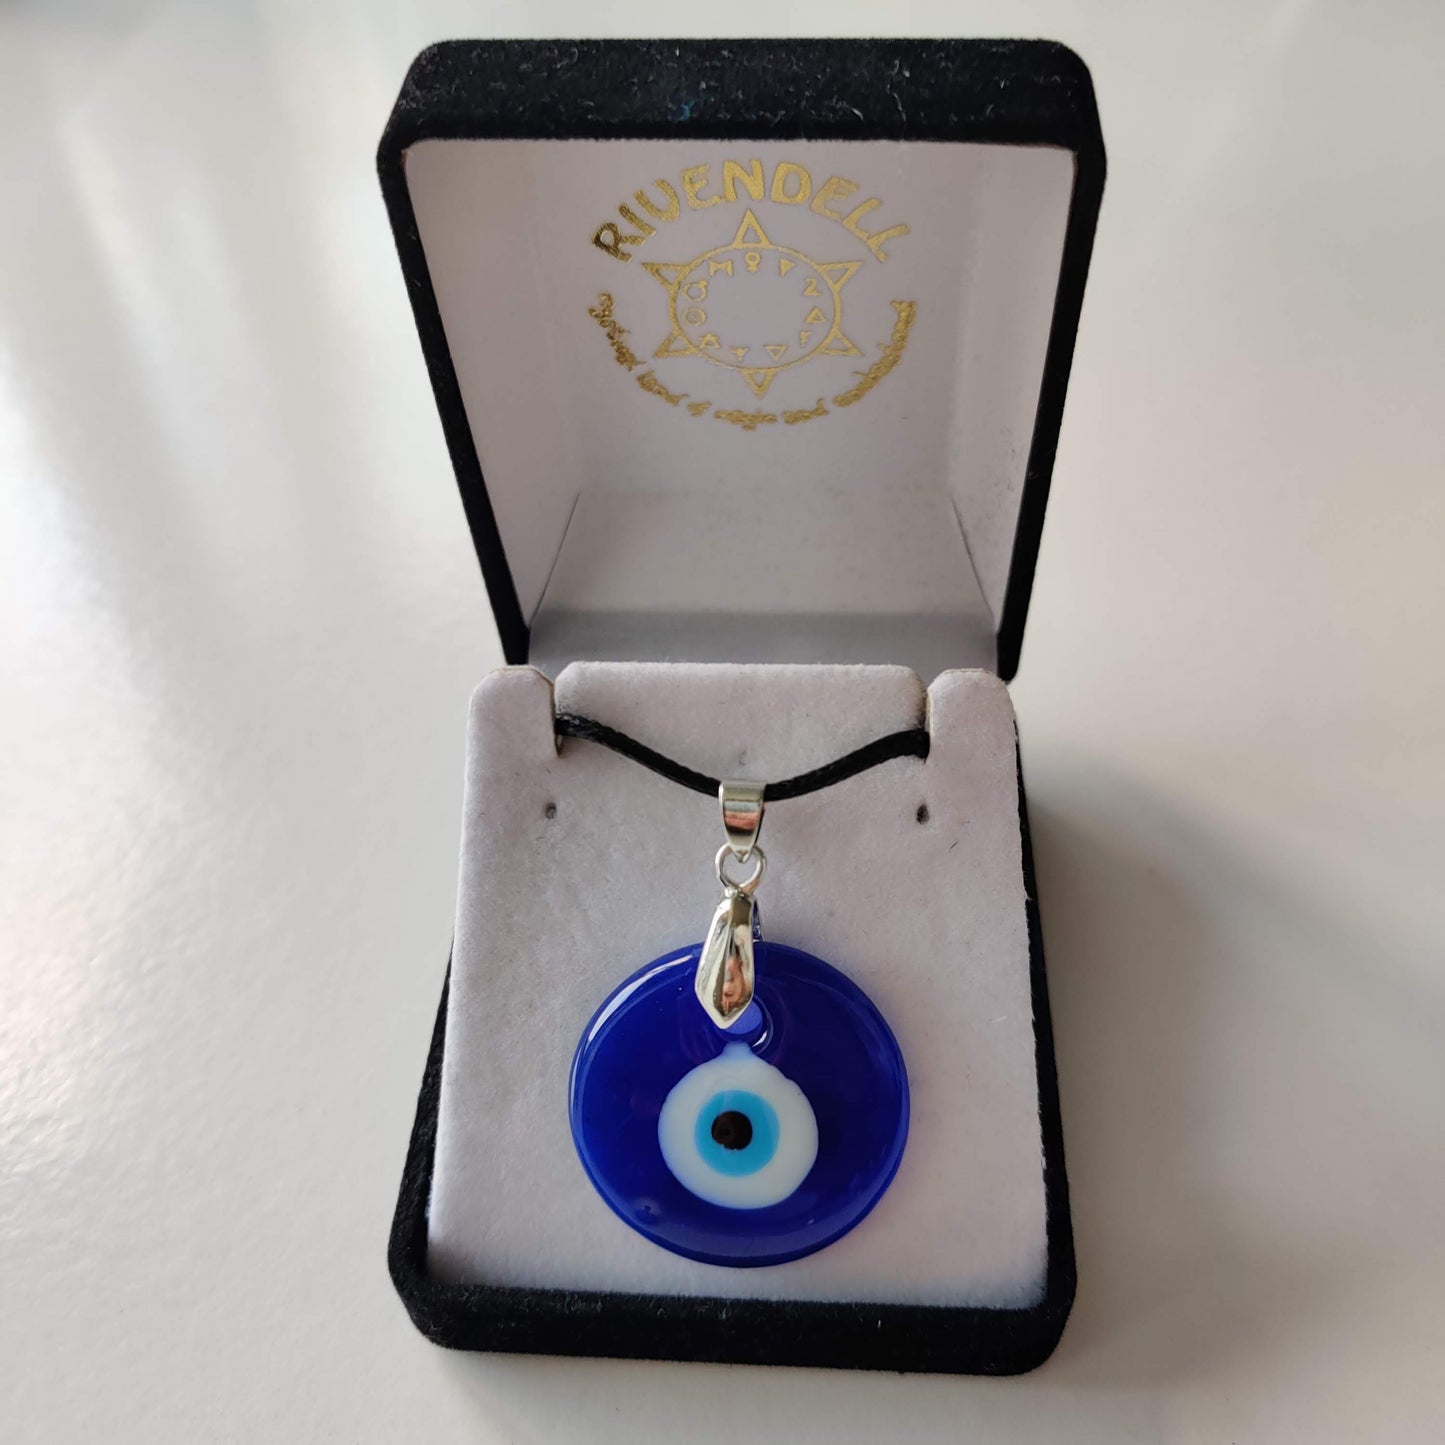 Evil Eye Necklace with Waxed Cord - Rivendell Shop